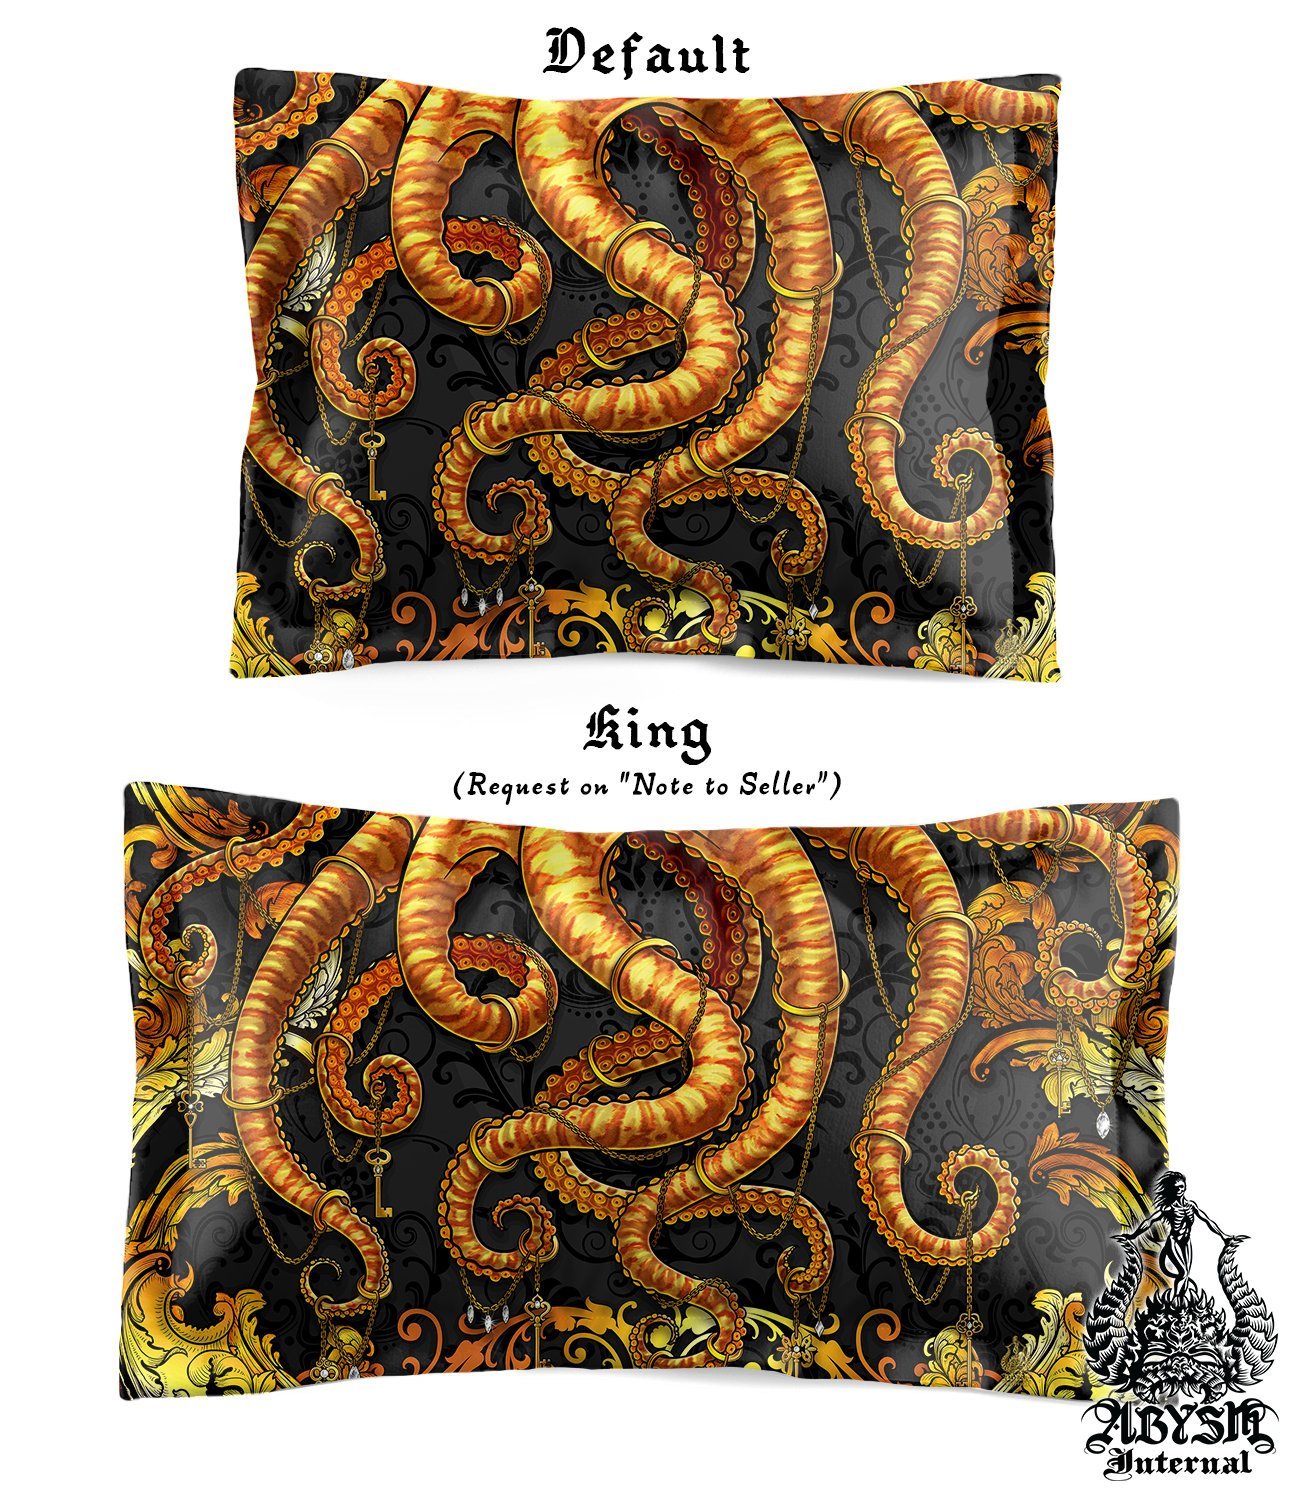 Octopus Bedding Set, Comforter and Duvet, Alternative Bed Cover and Beach Bedroom Decor, King, Queen and Twin Size - Gold and Black - Abysm Internal